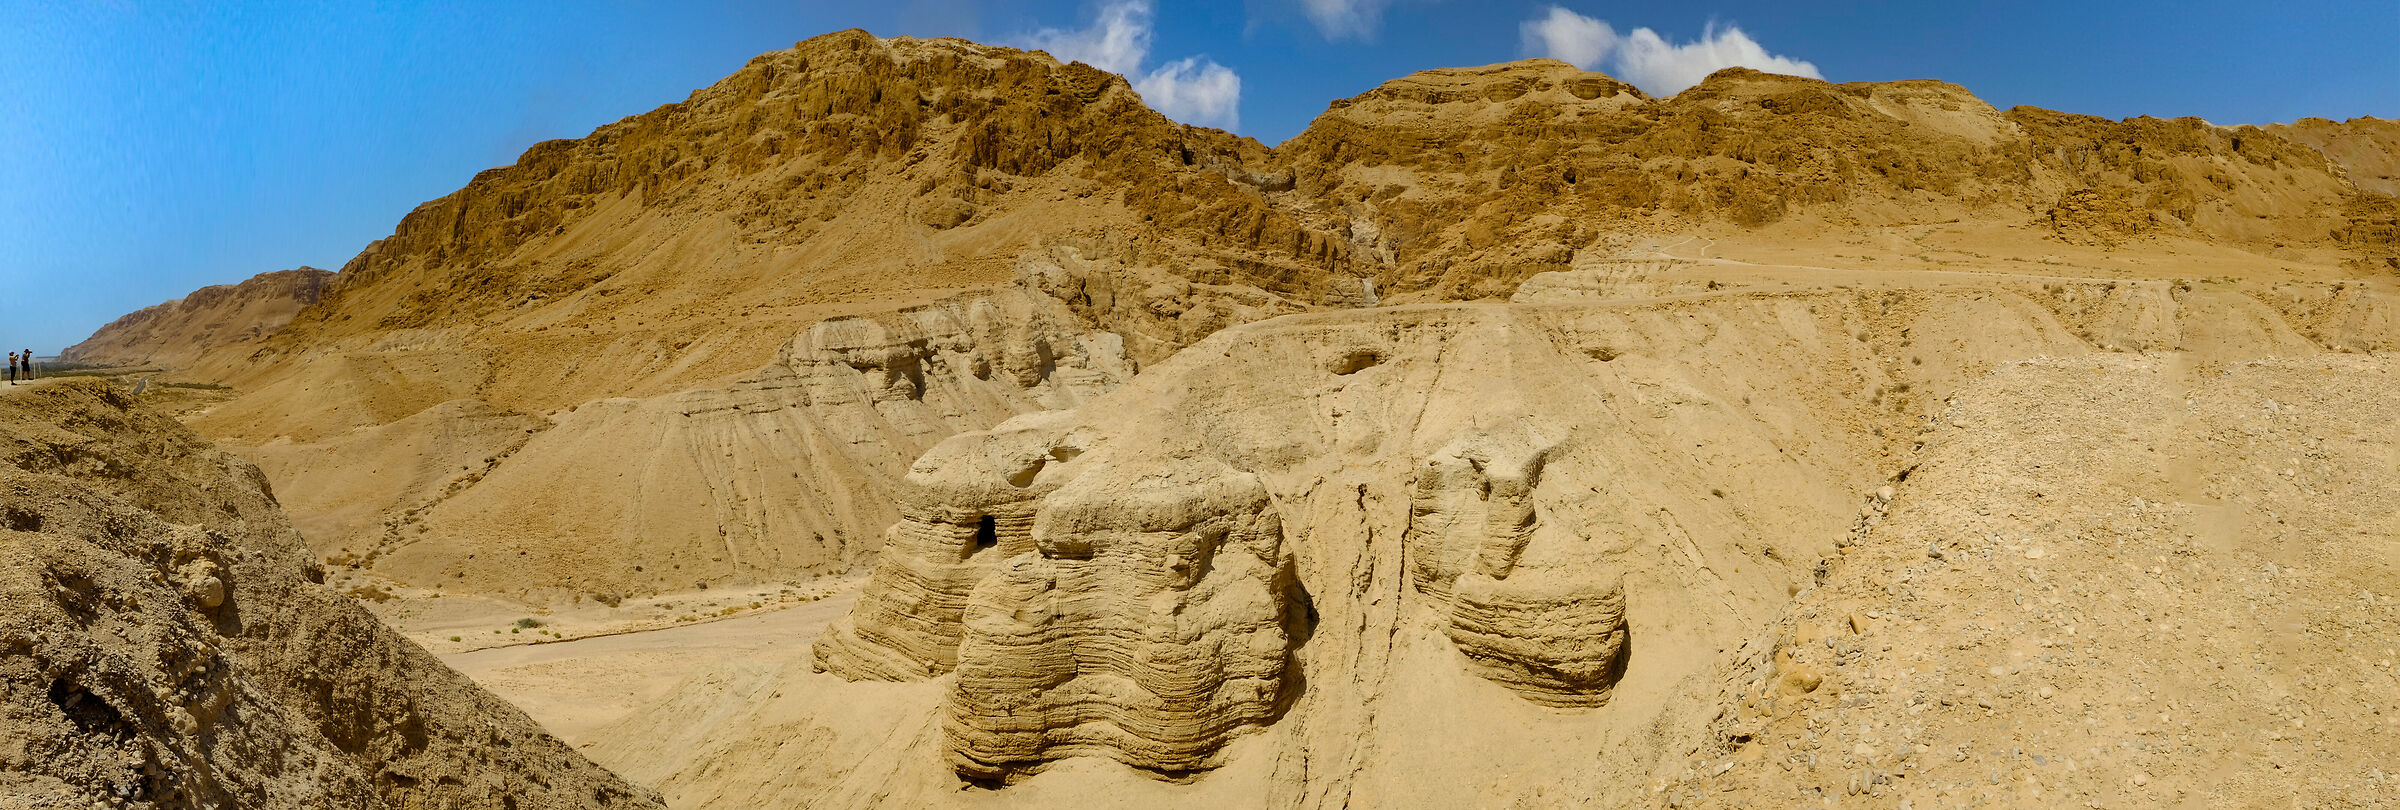 Qumran the places of the Bible...